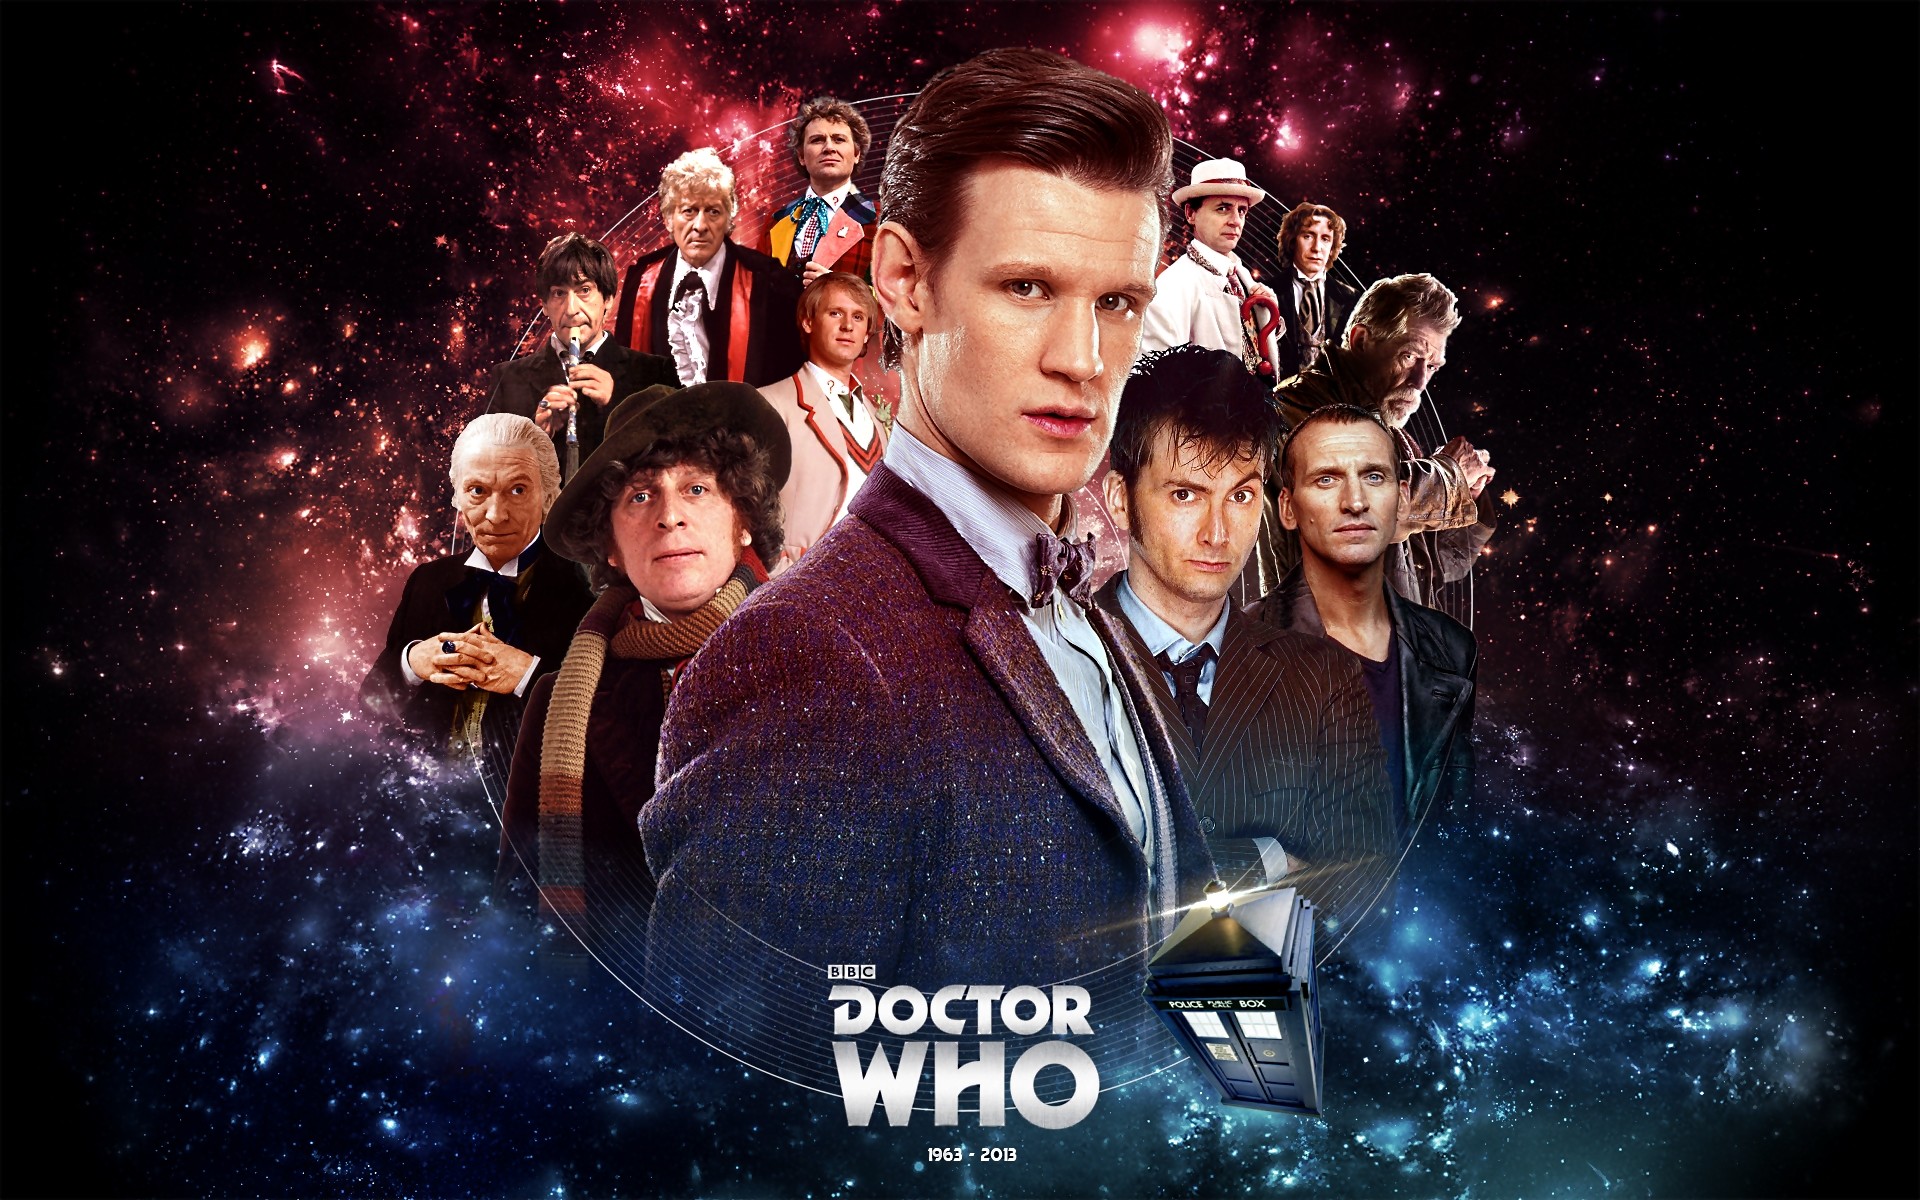 1920x1200 ... DisneyDoctorWhoSly23 Doctor Who - The first 50 Years by  DisneyDoctorWhoSly23